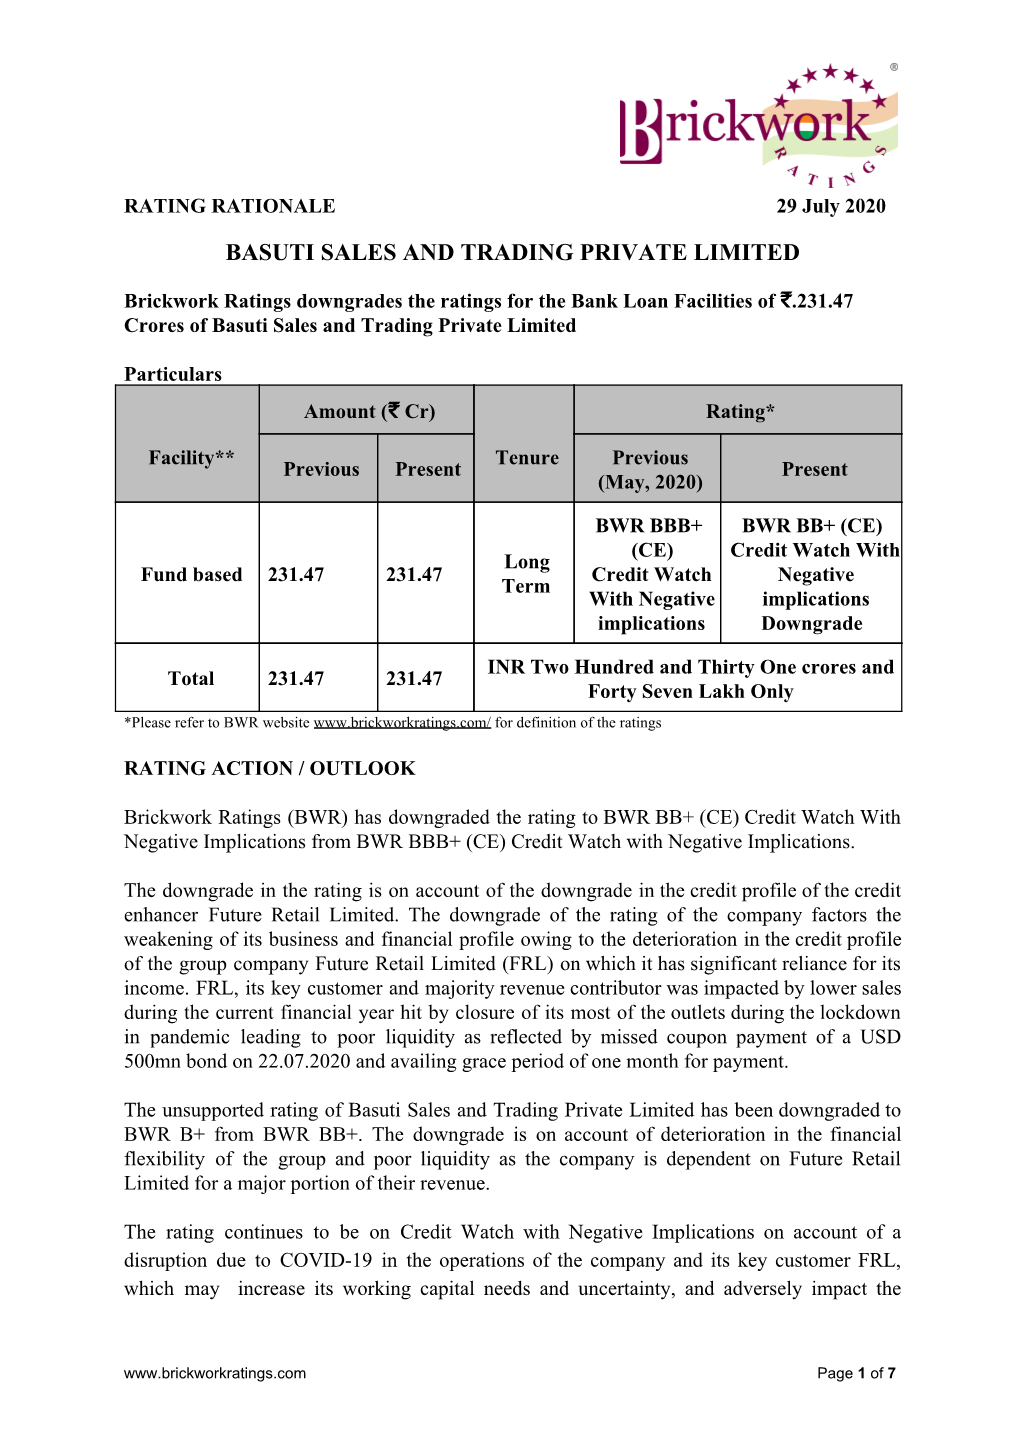 Basuti Sales and Trading Private Limited